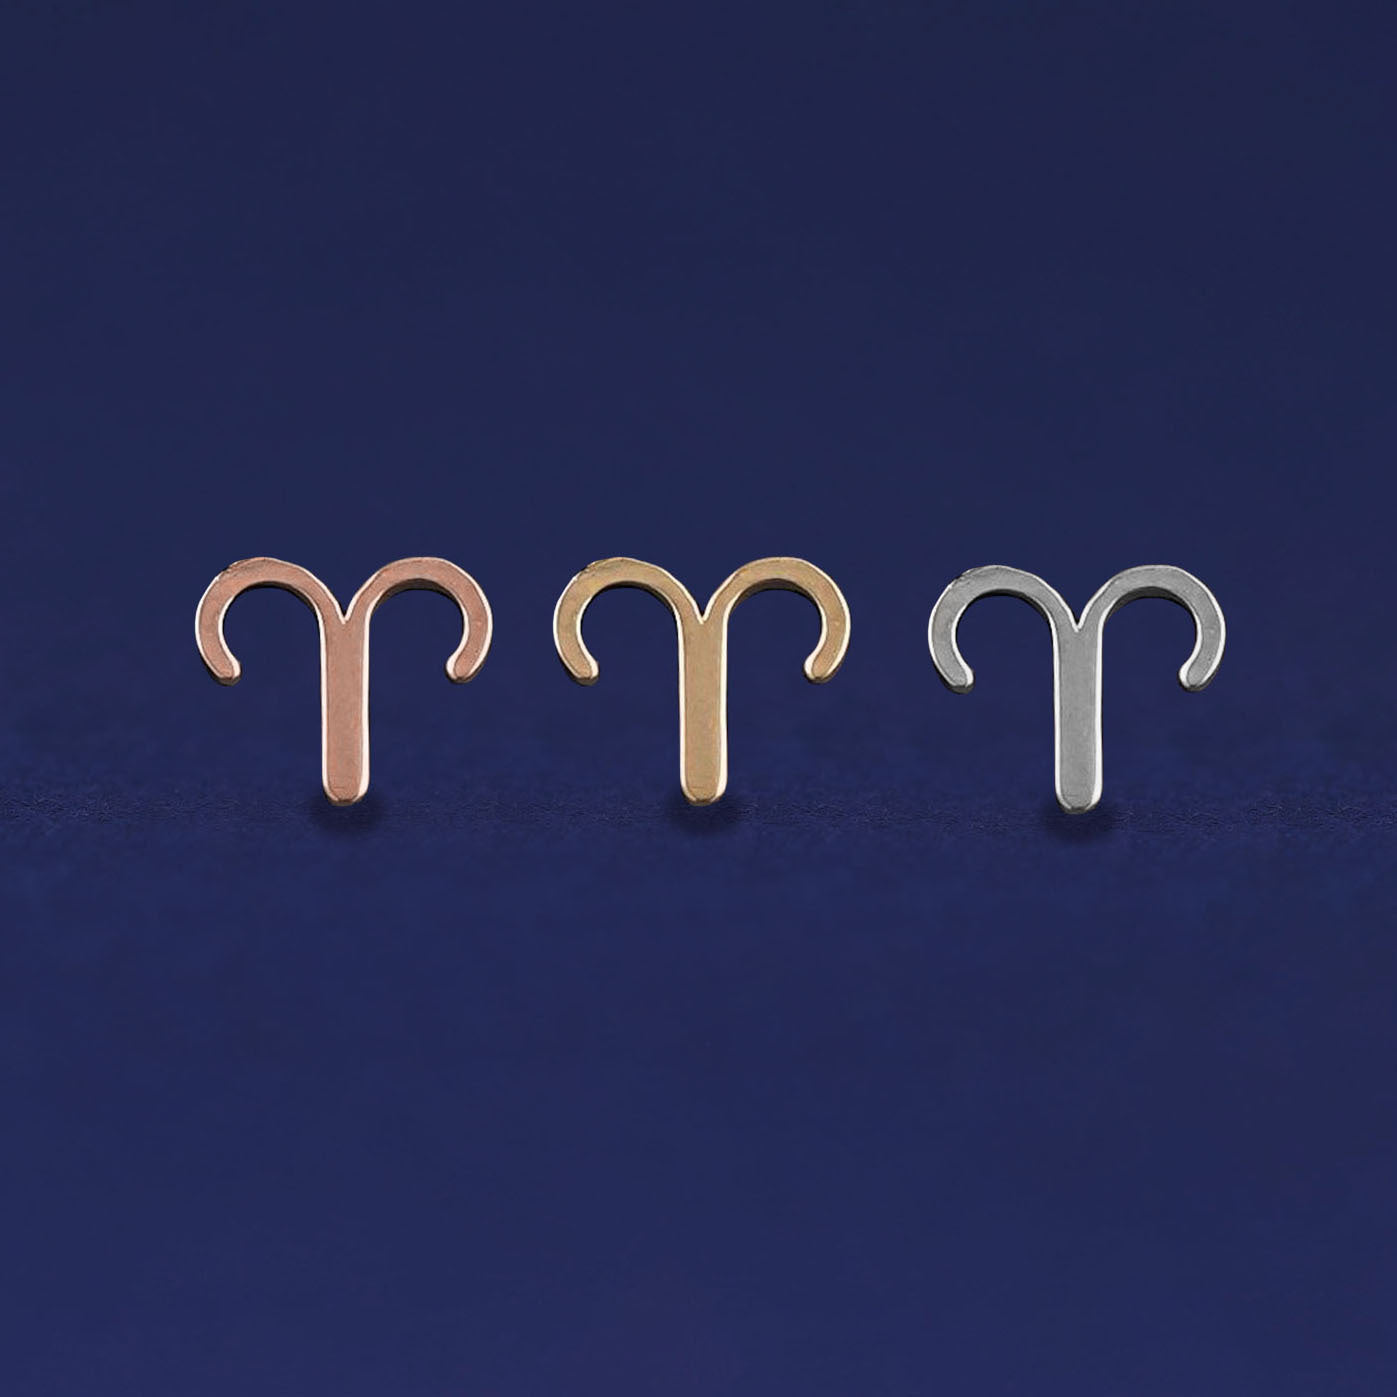 Three versions of the Aries Horoscope Earring shown in options of rose, yellow, and white gold